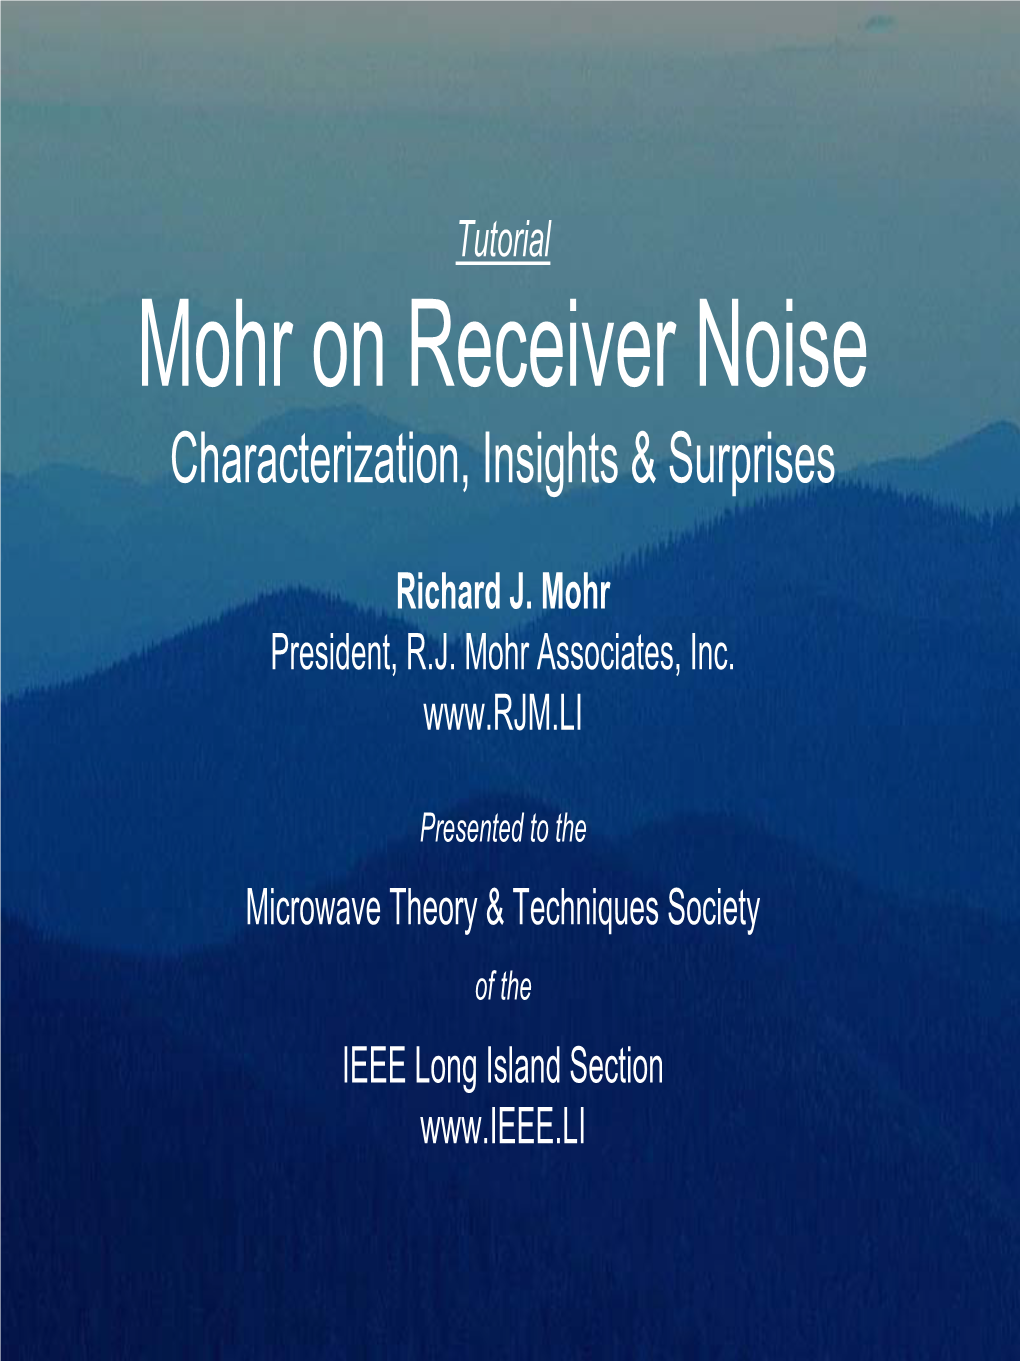 Mohr on Receiver Noise: Characterization, Insights & Surprises